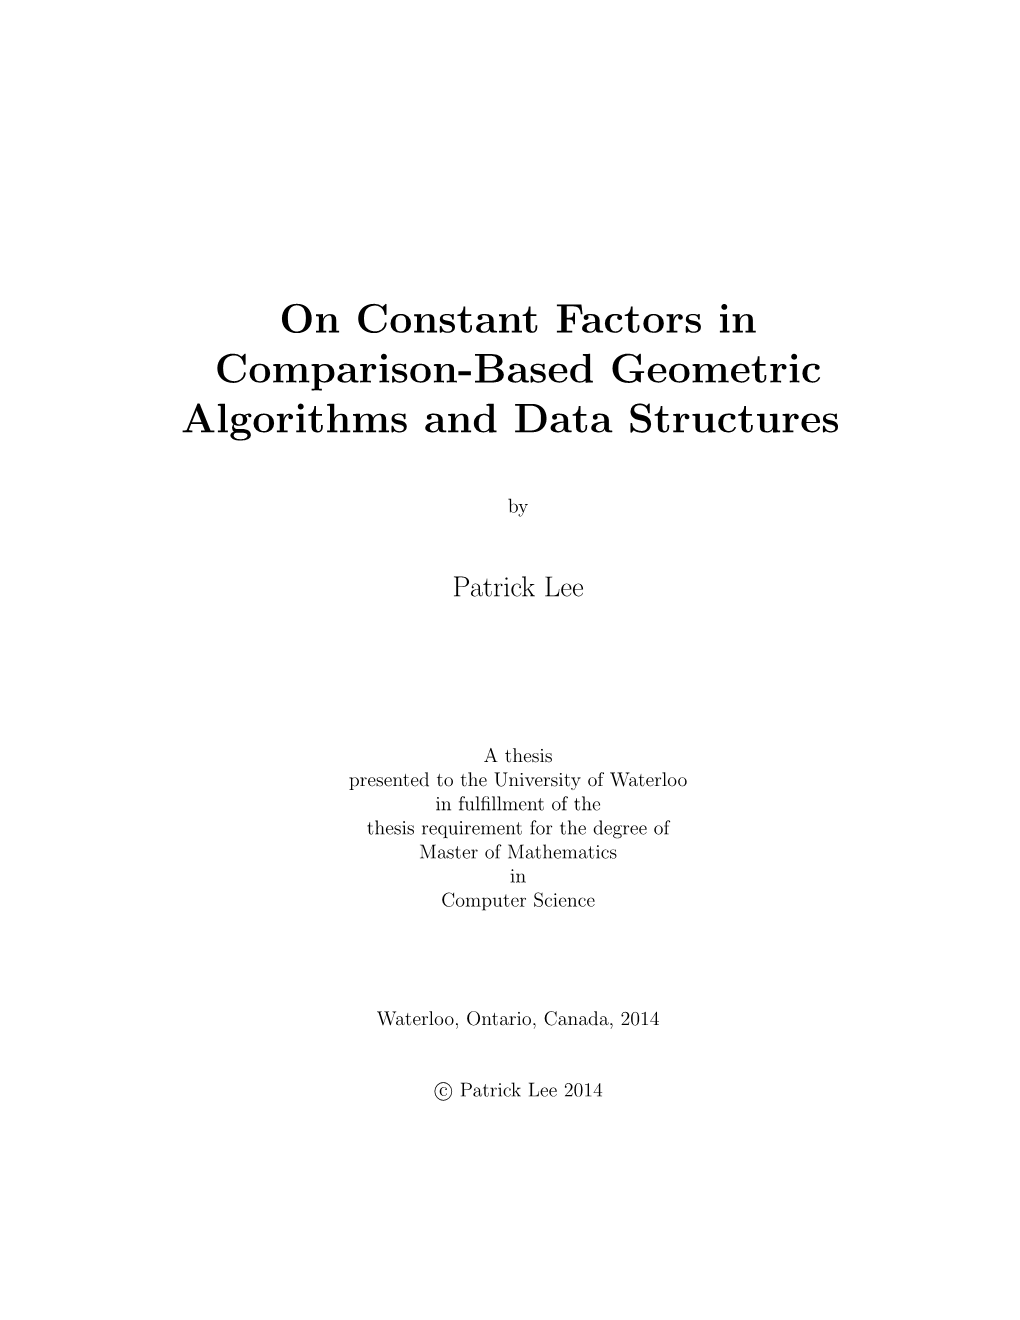 On Constant Factors in Comparison-Based Geometric Algorithms and Data Structures